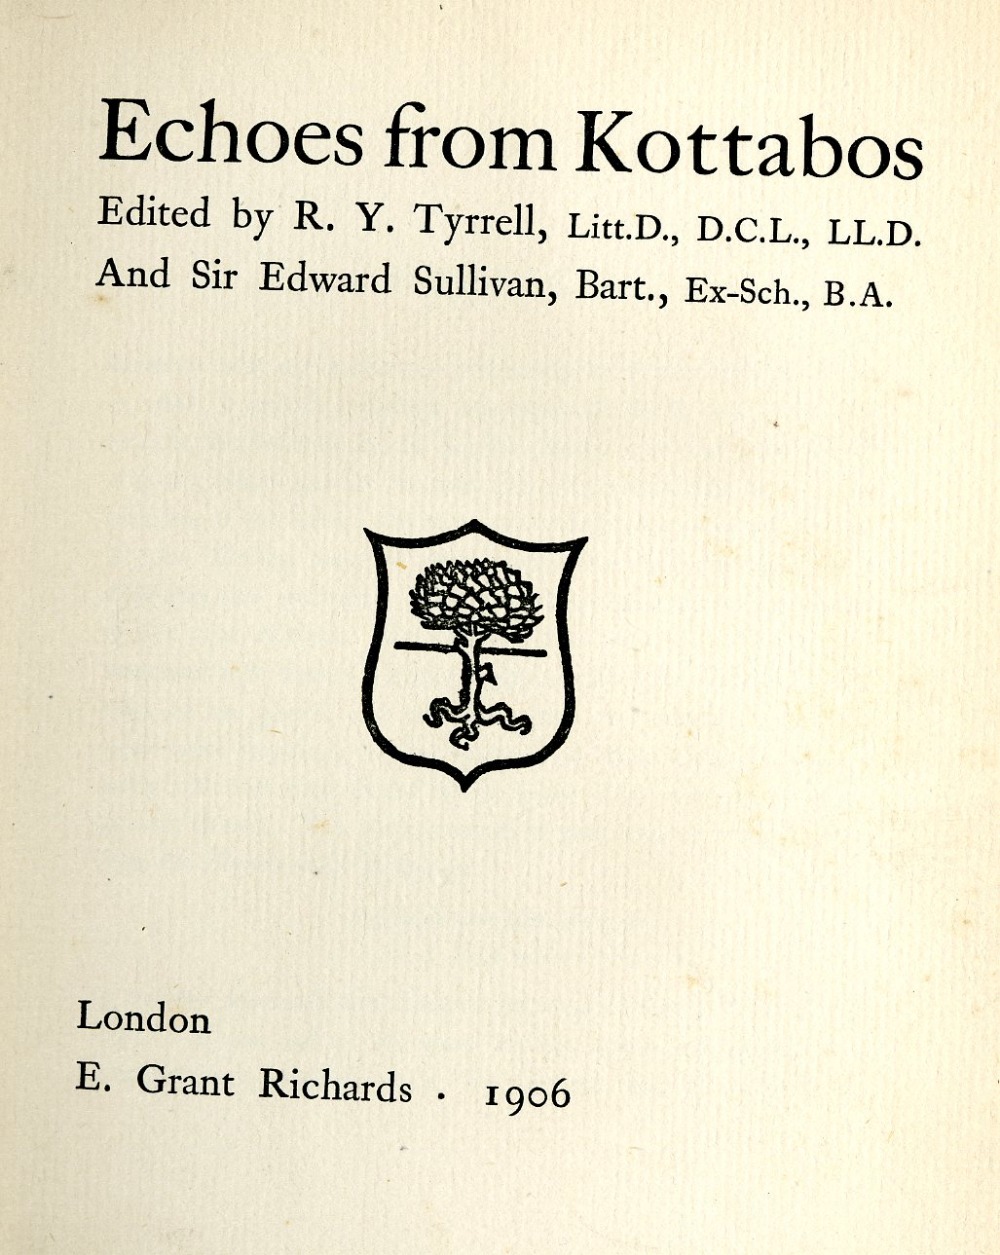 Tyrrell (R.Y.) & Sullivan (Sir E.)eds. Echoes from Kottabos, 4to L. (E.